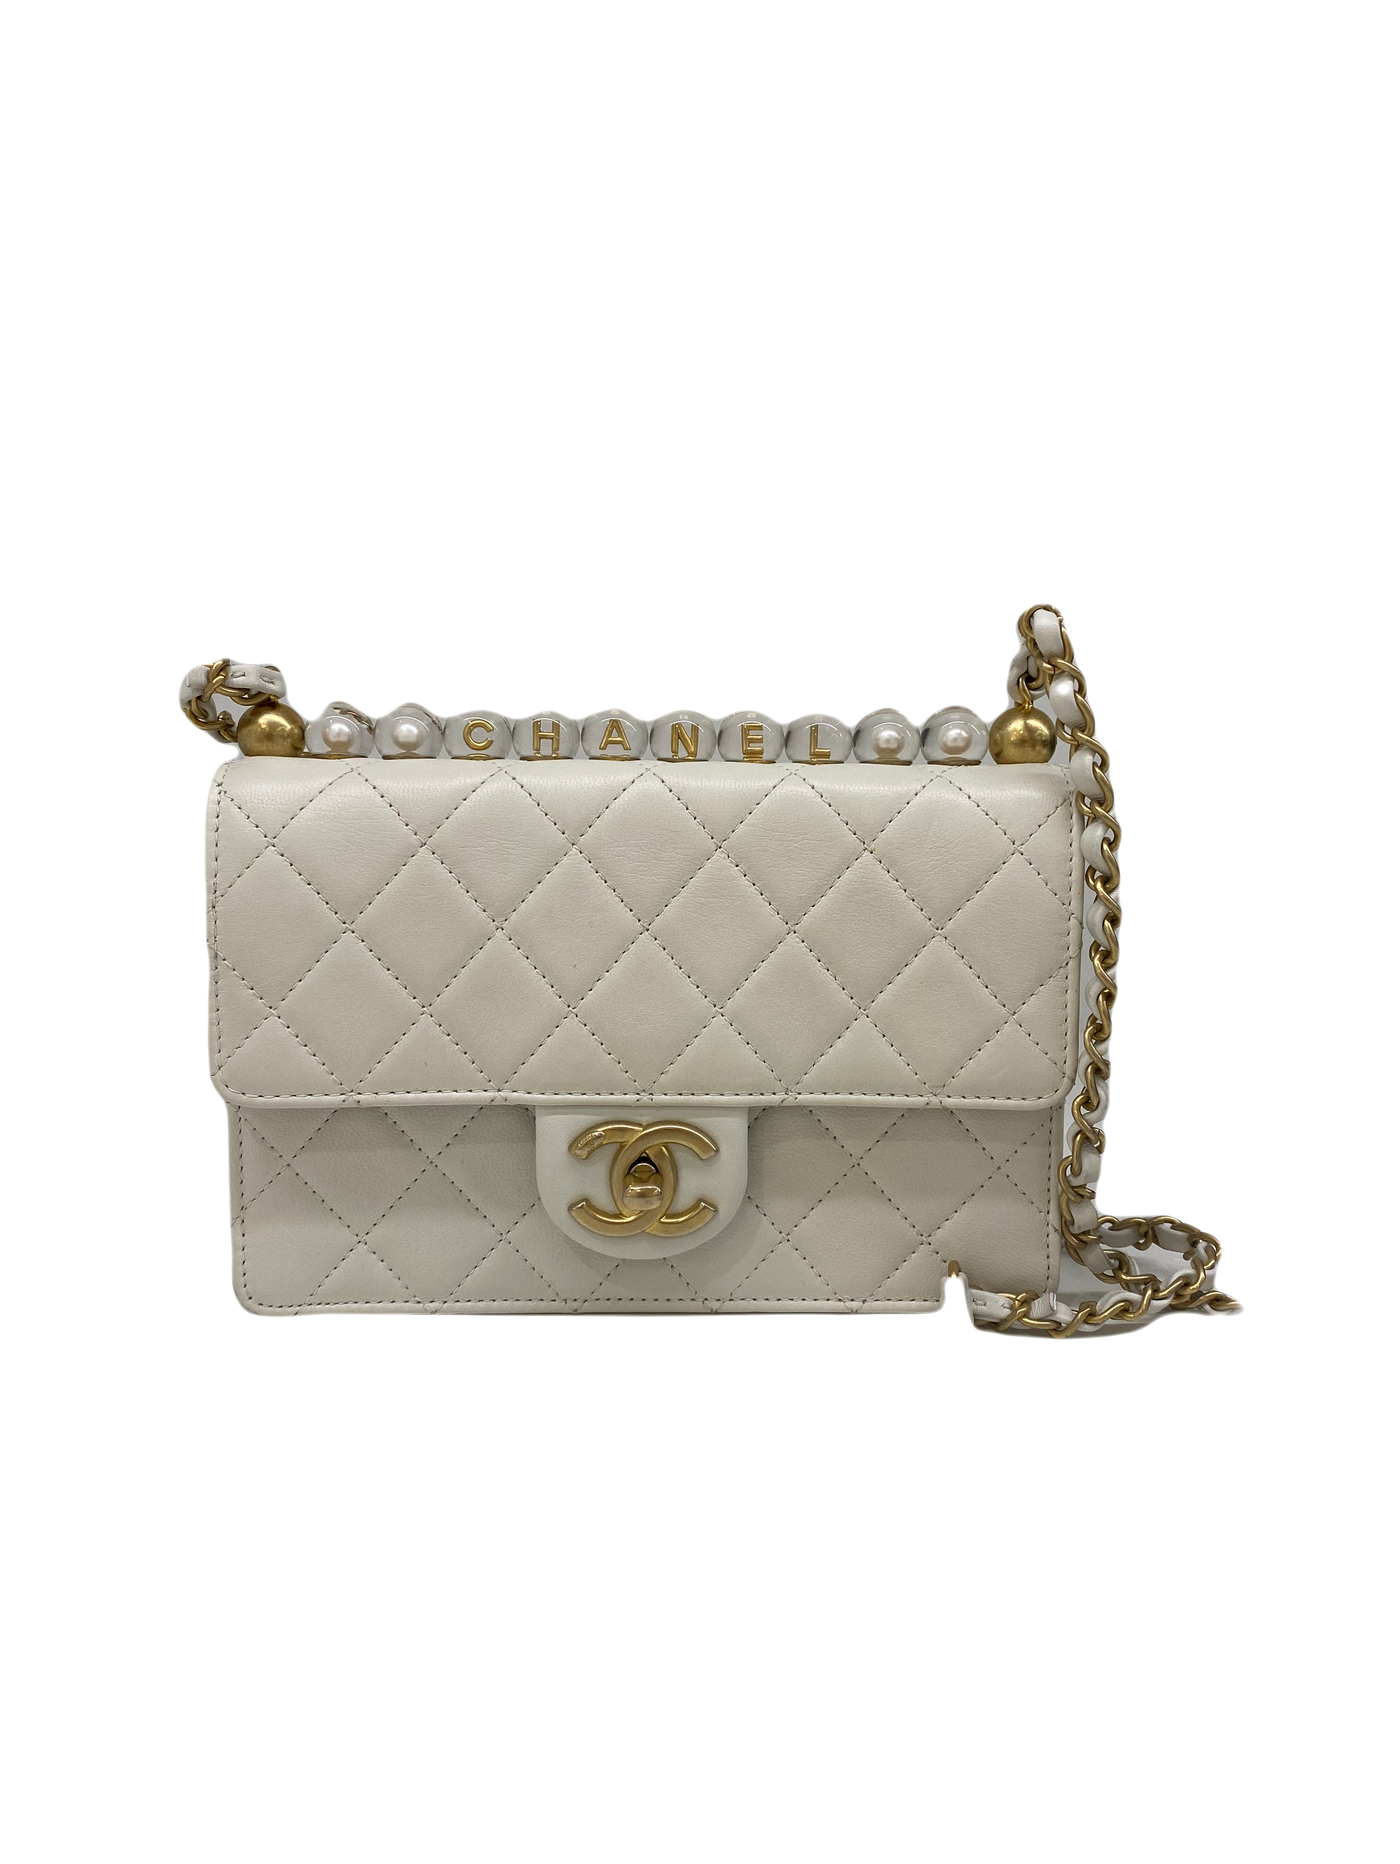 Chanel White Flap Bag with Pearl Detail - SOLD